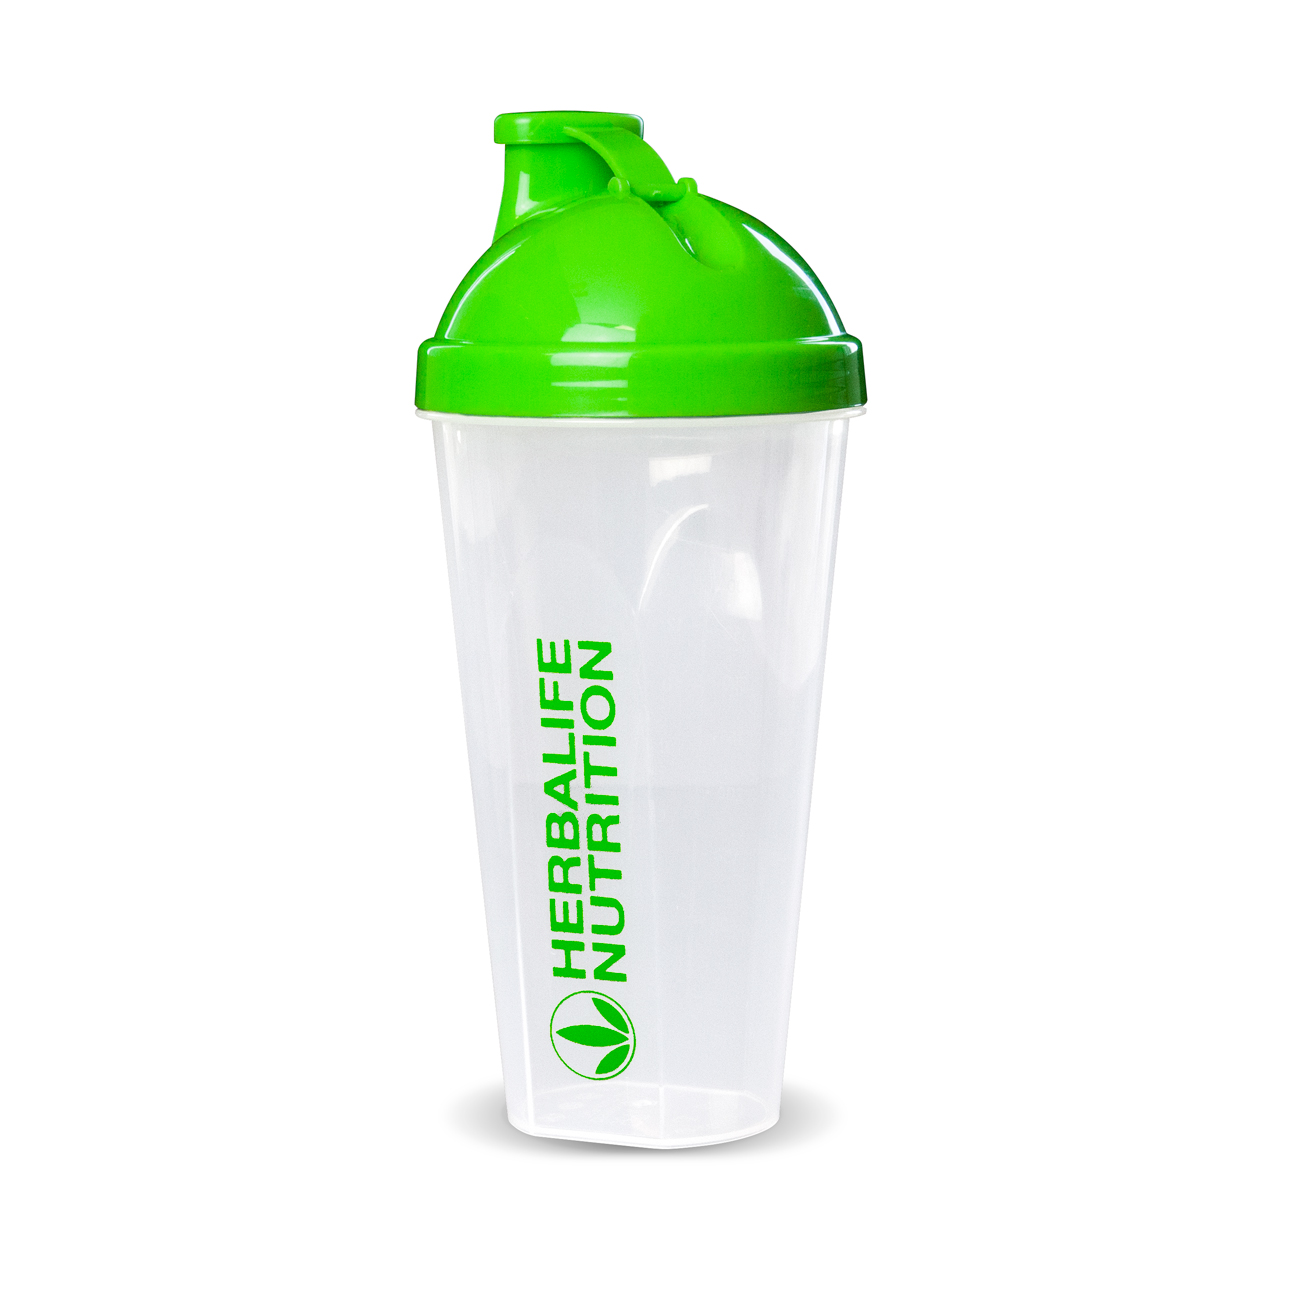 Details about   HOT Herbalife Nutrition Shake Cup W/ Straw Large Sport Water Bottle Outdoor 34oz 